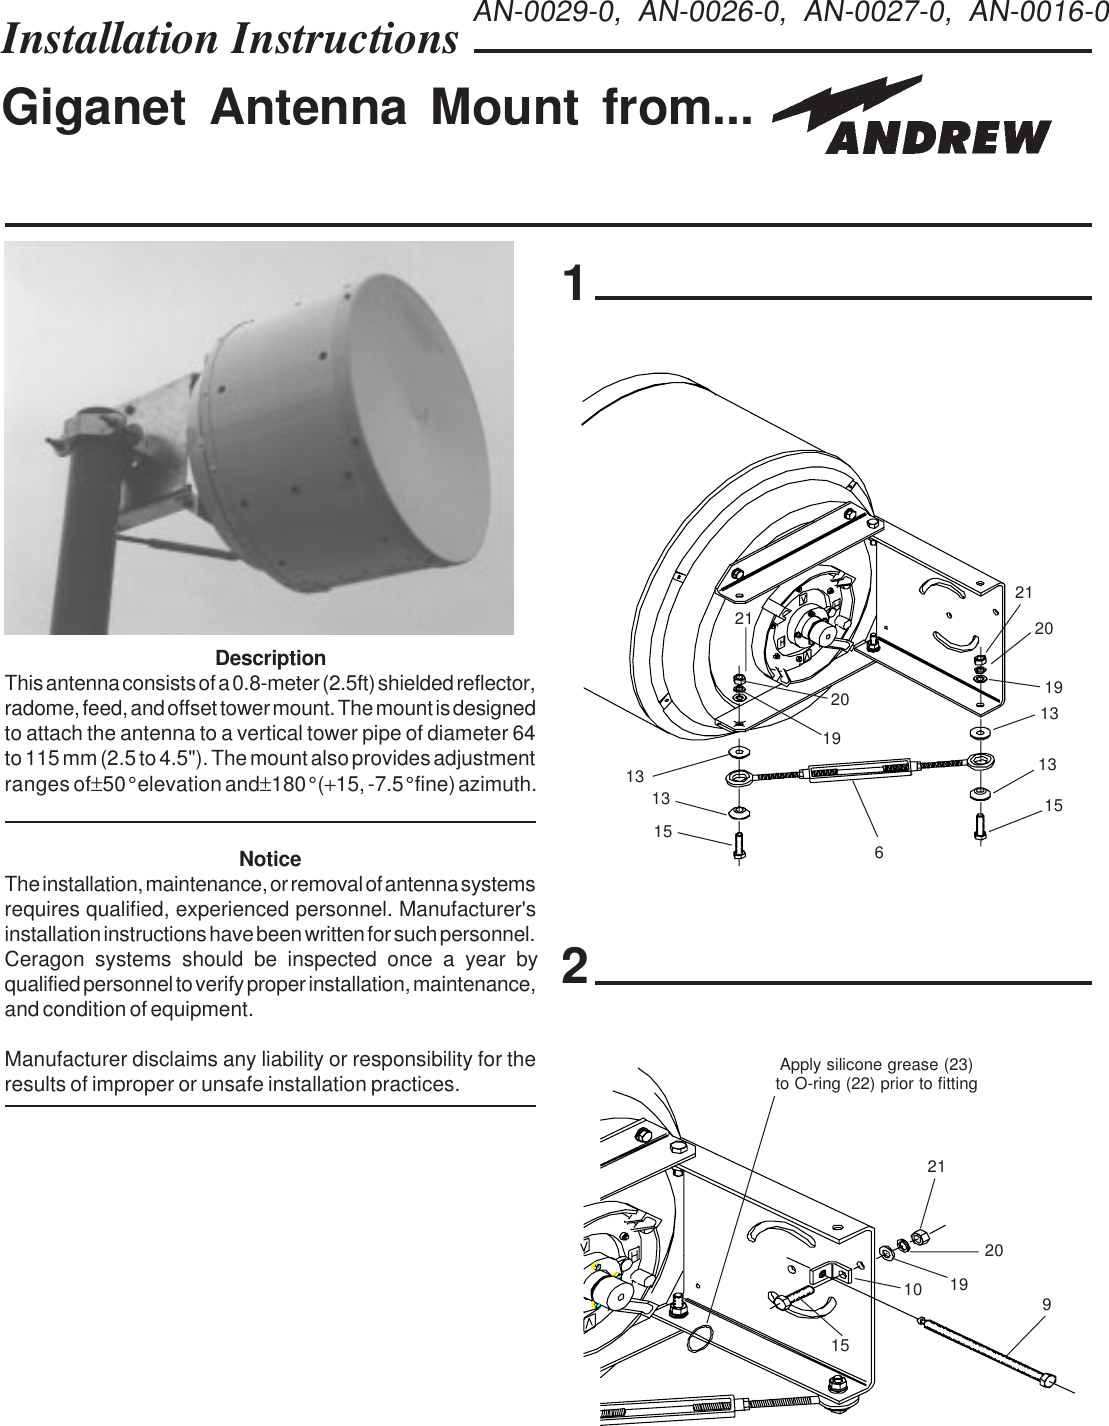 Installation Instructions Giganet Antenna Mount from...122120191313151513136AN-0029-0, AN-0026-0, AN-0027-0, AN-0016-0211920DescriptionThis antenna consists of a 0.8-meter (2.5ft) shielded reflector,radome, feed, and offset tower mount. The mount is designedto attach the antenna to a vertical tower pipe of diameter 64to 115 mm (2.5 to 4.5&quot;). The mount also provides adjustmentranges of ±50° elevation and ±180° (+15, -7.5° fine) azimuth.NoticeThe installation, maintenance, or removal of antenna systemsrequires qualified, experienced personnel. Manufacturer&apos;sinstallation instructions have been written for such personnel.qualified personnel to verify proper installation, maintenance,and condition of equipment.Manufacturer disclaims any liability or responsibility for theresults of improper or unsafe installation practices.21192091015Apply silicone grease (23)to O-ring (22) prior to fittingCeragon systems should be inspected once a year by